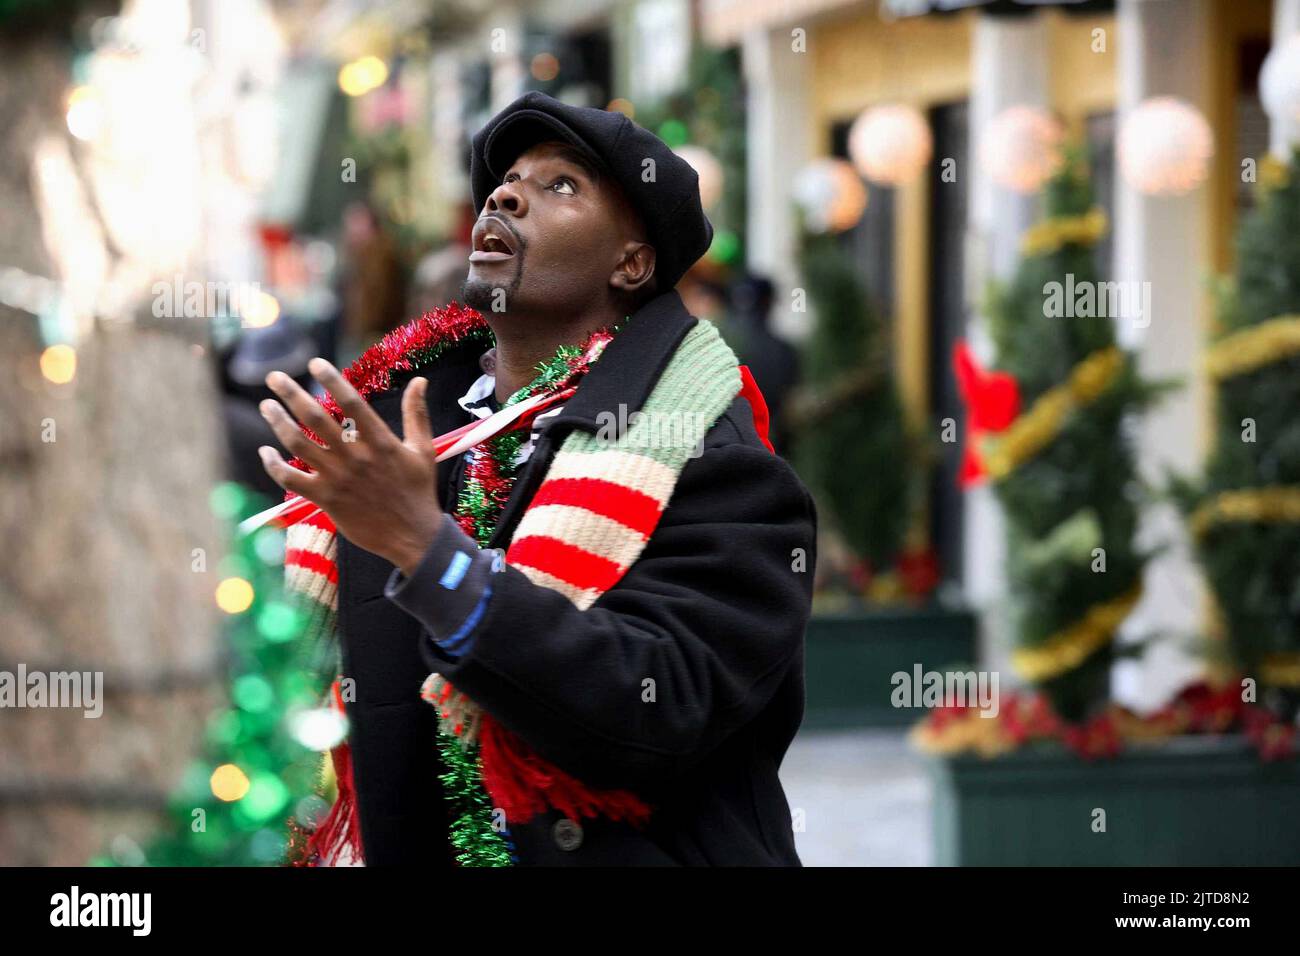 MORRIS CHESTNUT, THE PERFECT HOLIDAY, 2007 Stock Photo